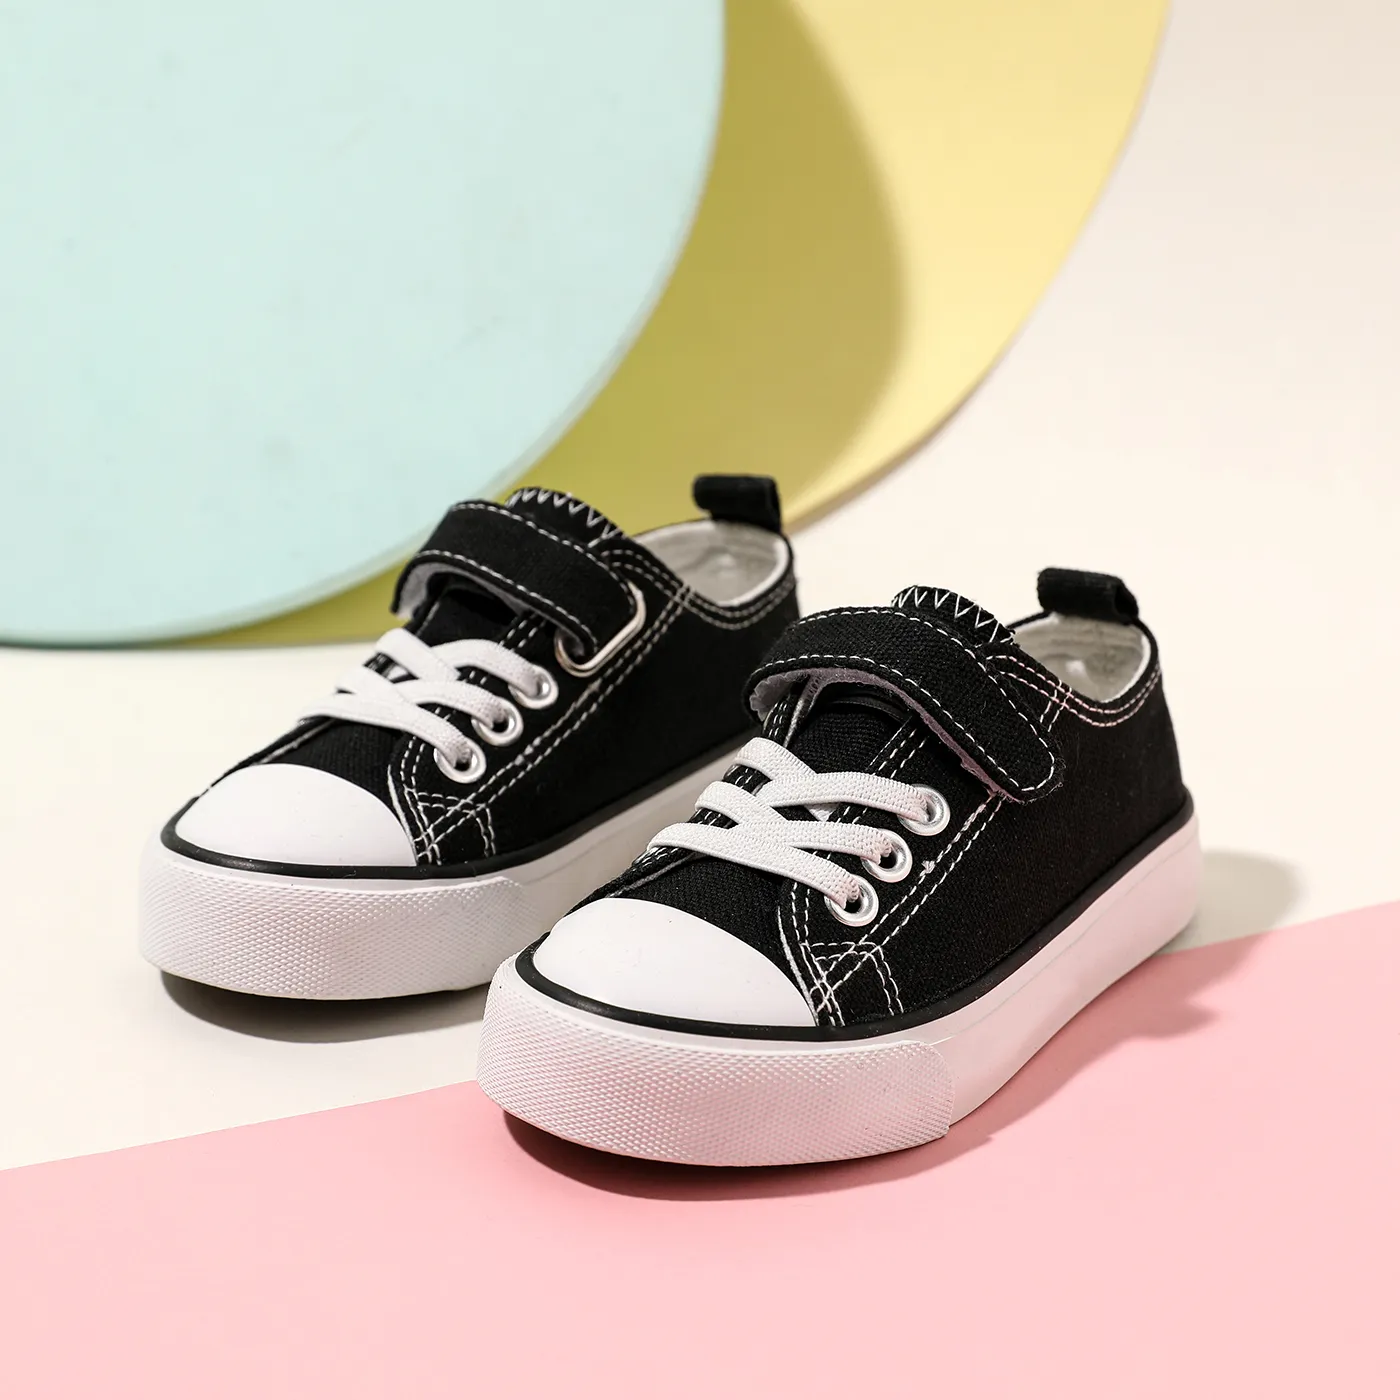 Toddler / Kid Casual Lace Up Velcro Black Canvas Shoes (Toddler US 6-7.5 and Toddler US 8-Little Kid